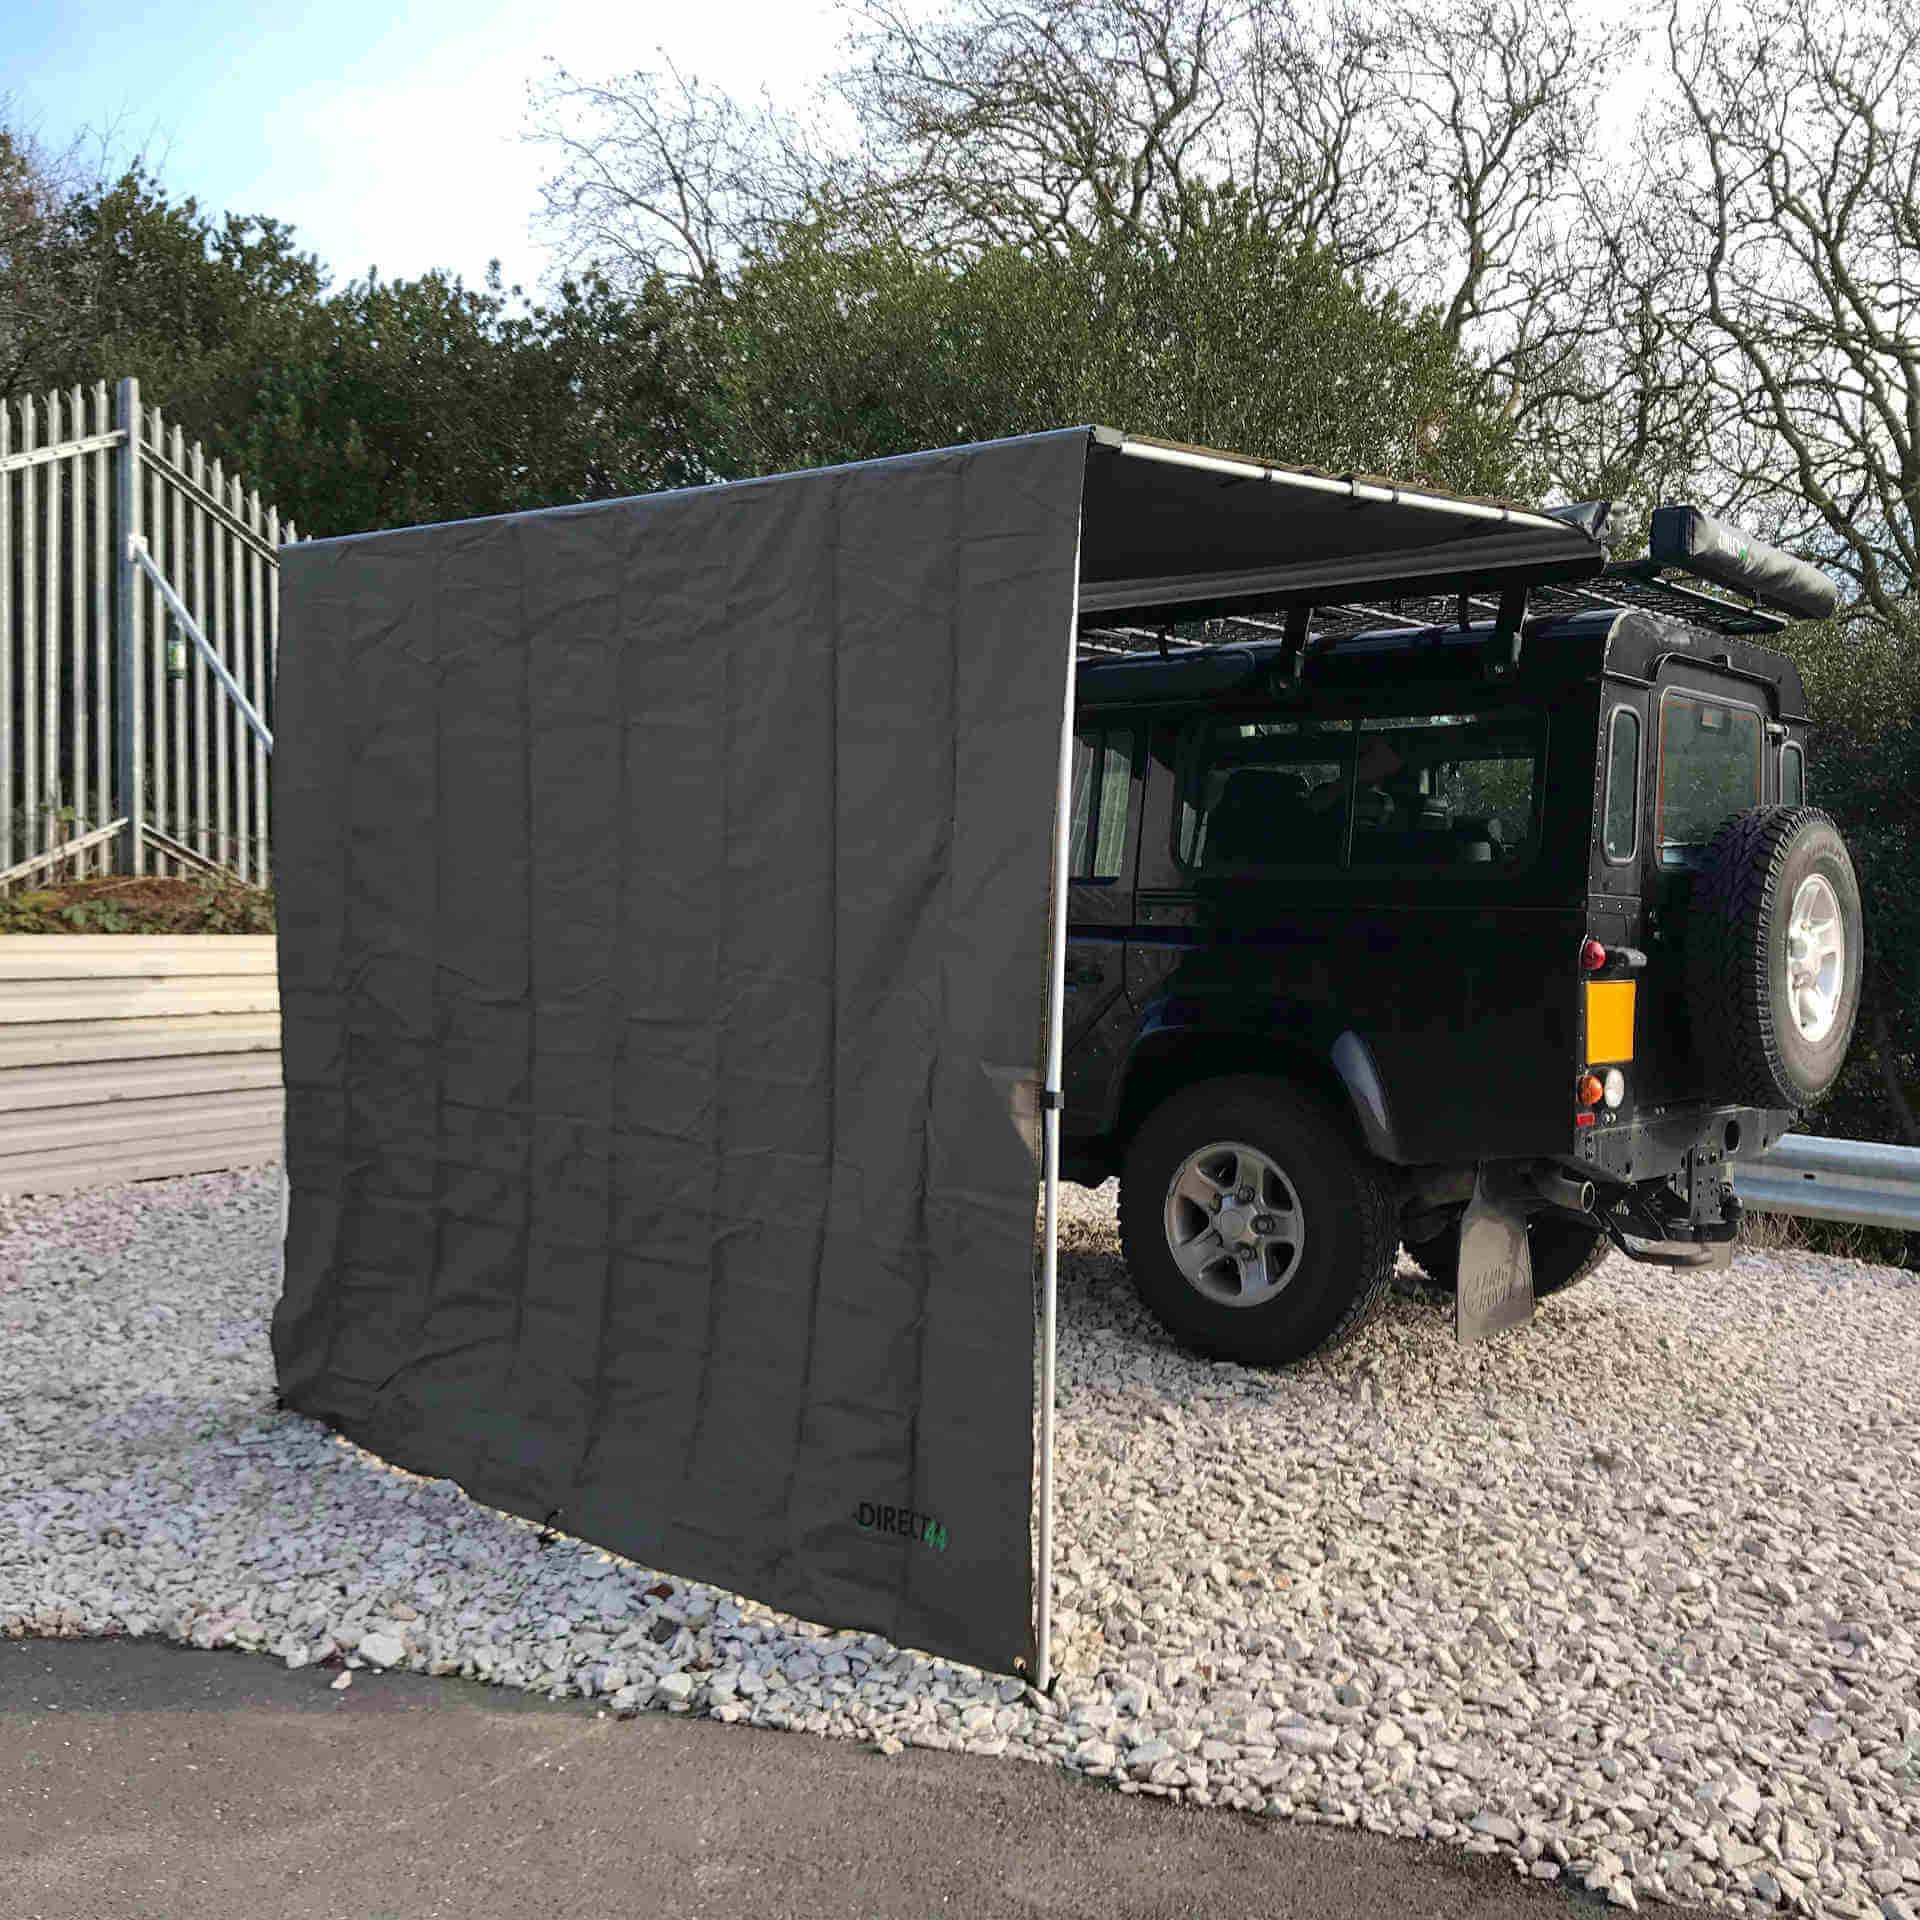 Front Windbreak Wall for Direct4x4 Expedition Awnings - 2mx2.2m Forest Green -  - sold by Direct4x4